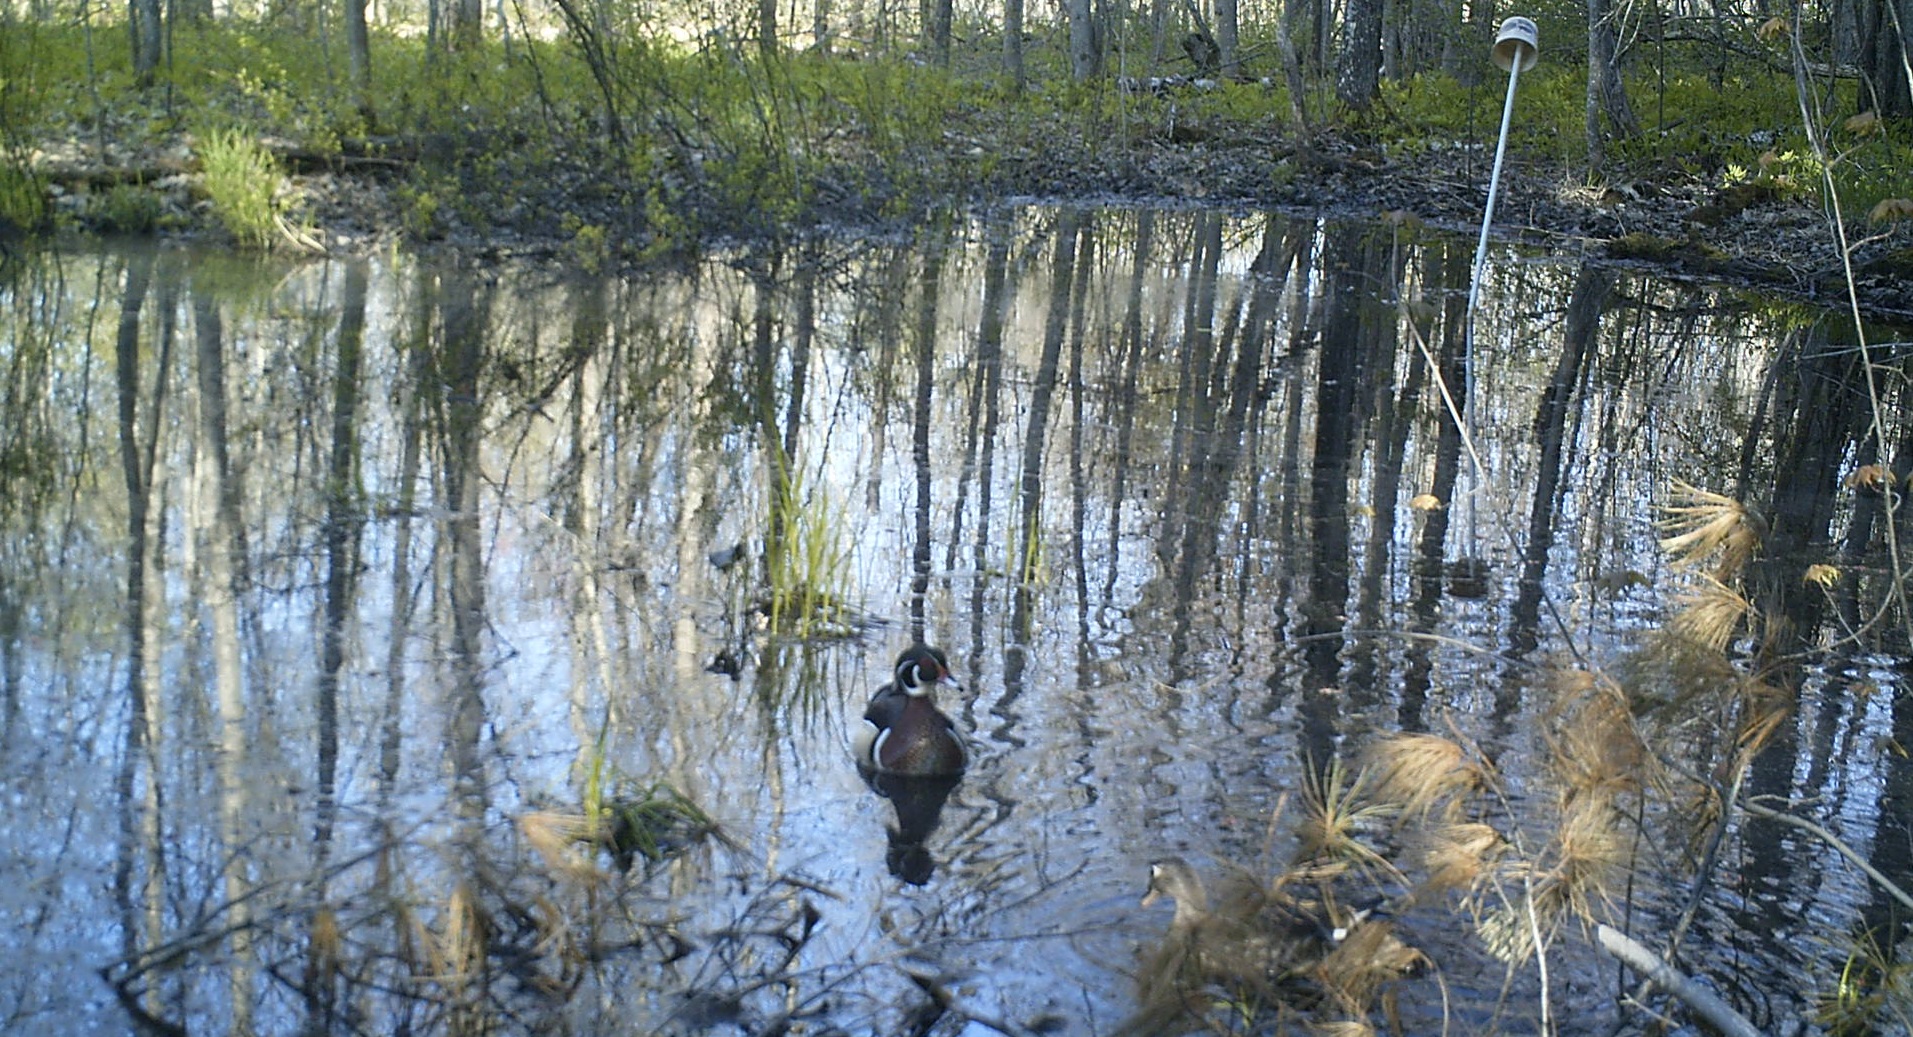 A pair of Wood Ducks dabble in a vernal pool. The colorful male is at the center of the photo and the somewhat drabber female is partly obscured by a pine bough at the lower right corner of the photo. Photo credit: Pools and People Trail Camera